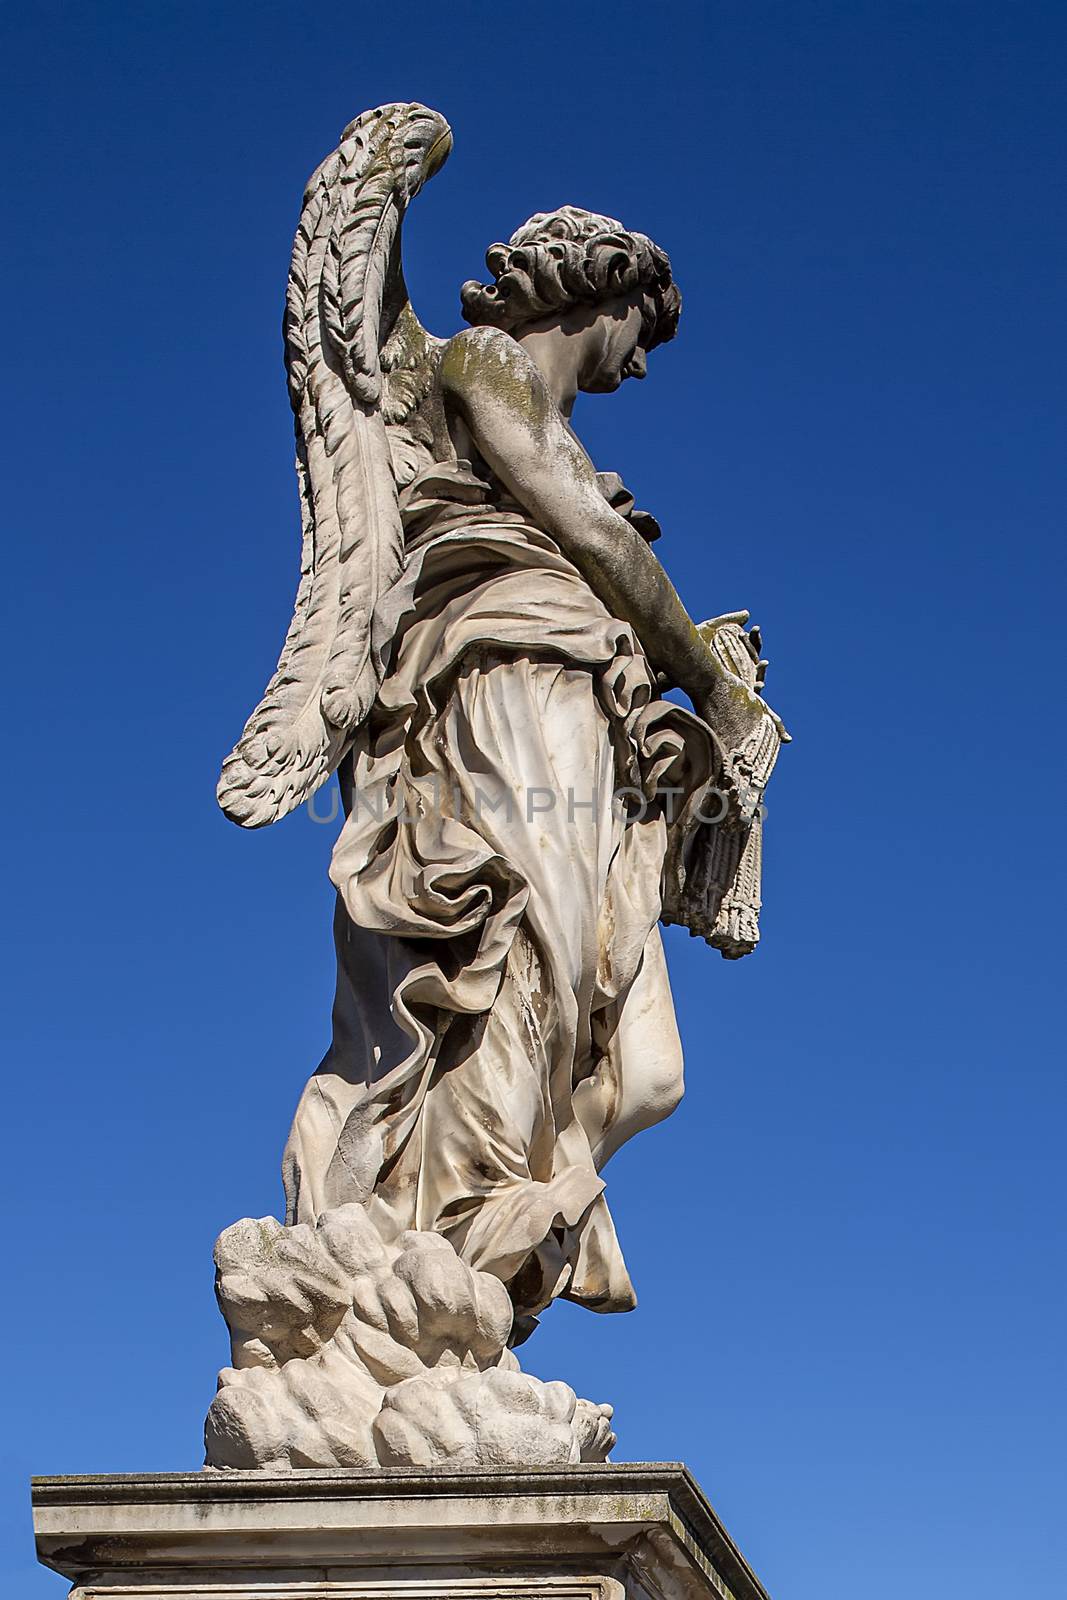 Statue of a monument to an angel on a background of blue sky. by 977_ReX_977